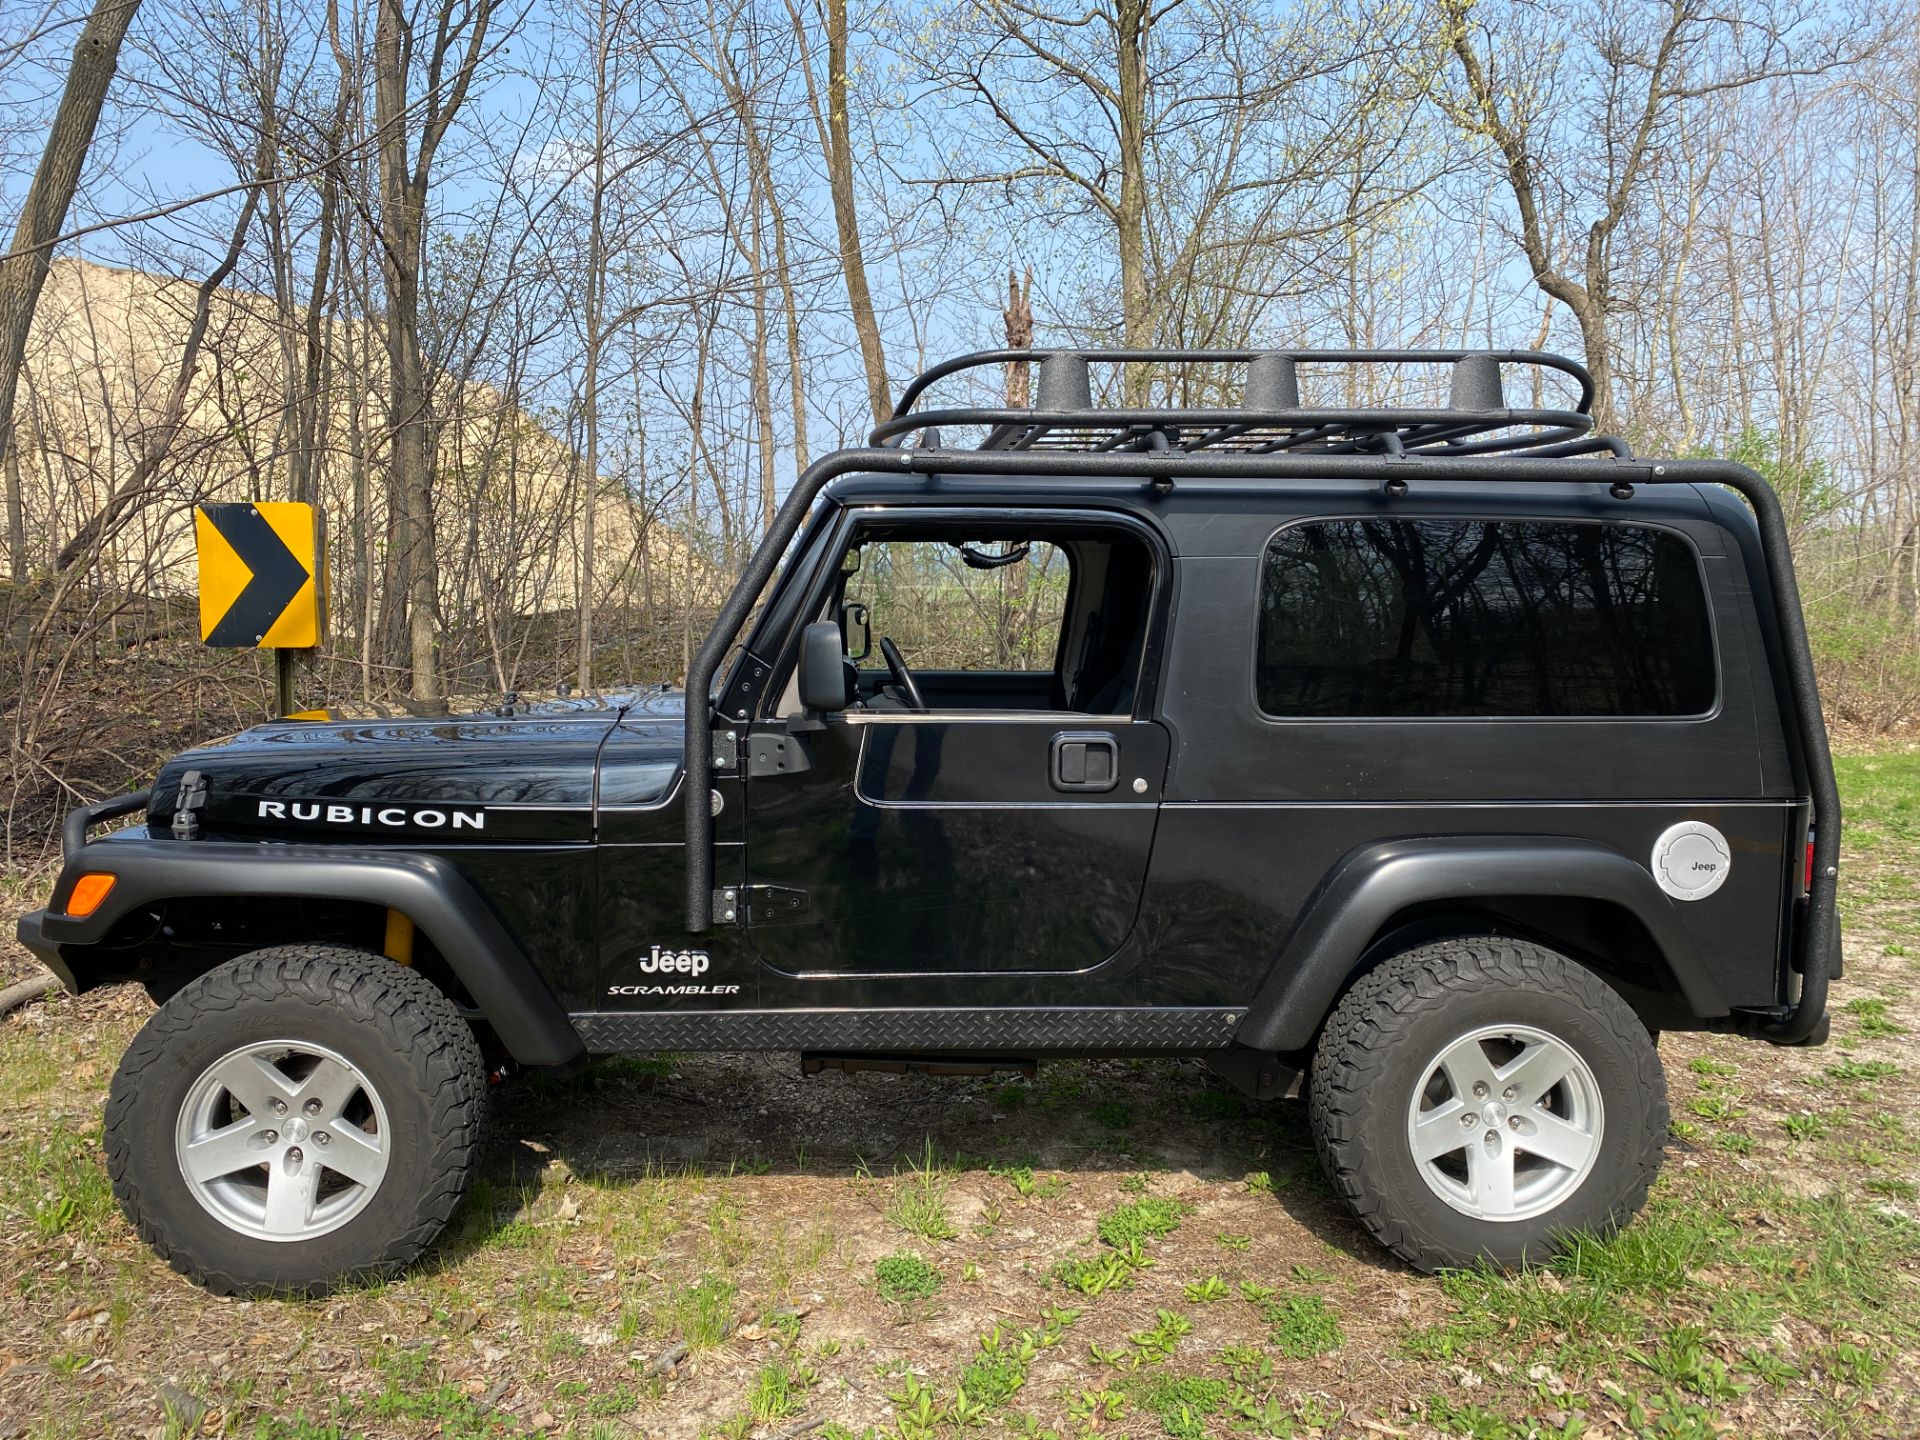 2006 Jeep® Wrangler Unlimited Rubicon in Big Bend, Wisconsin - Photo 17